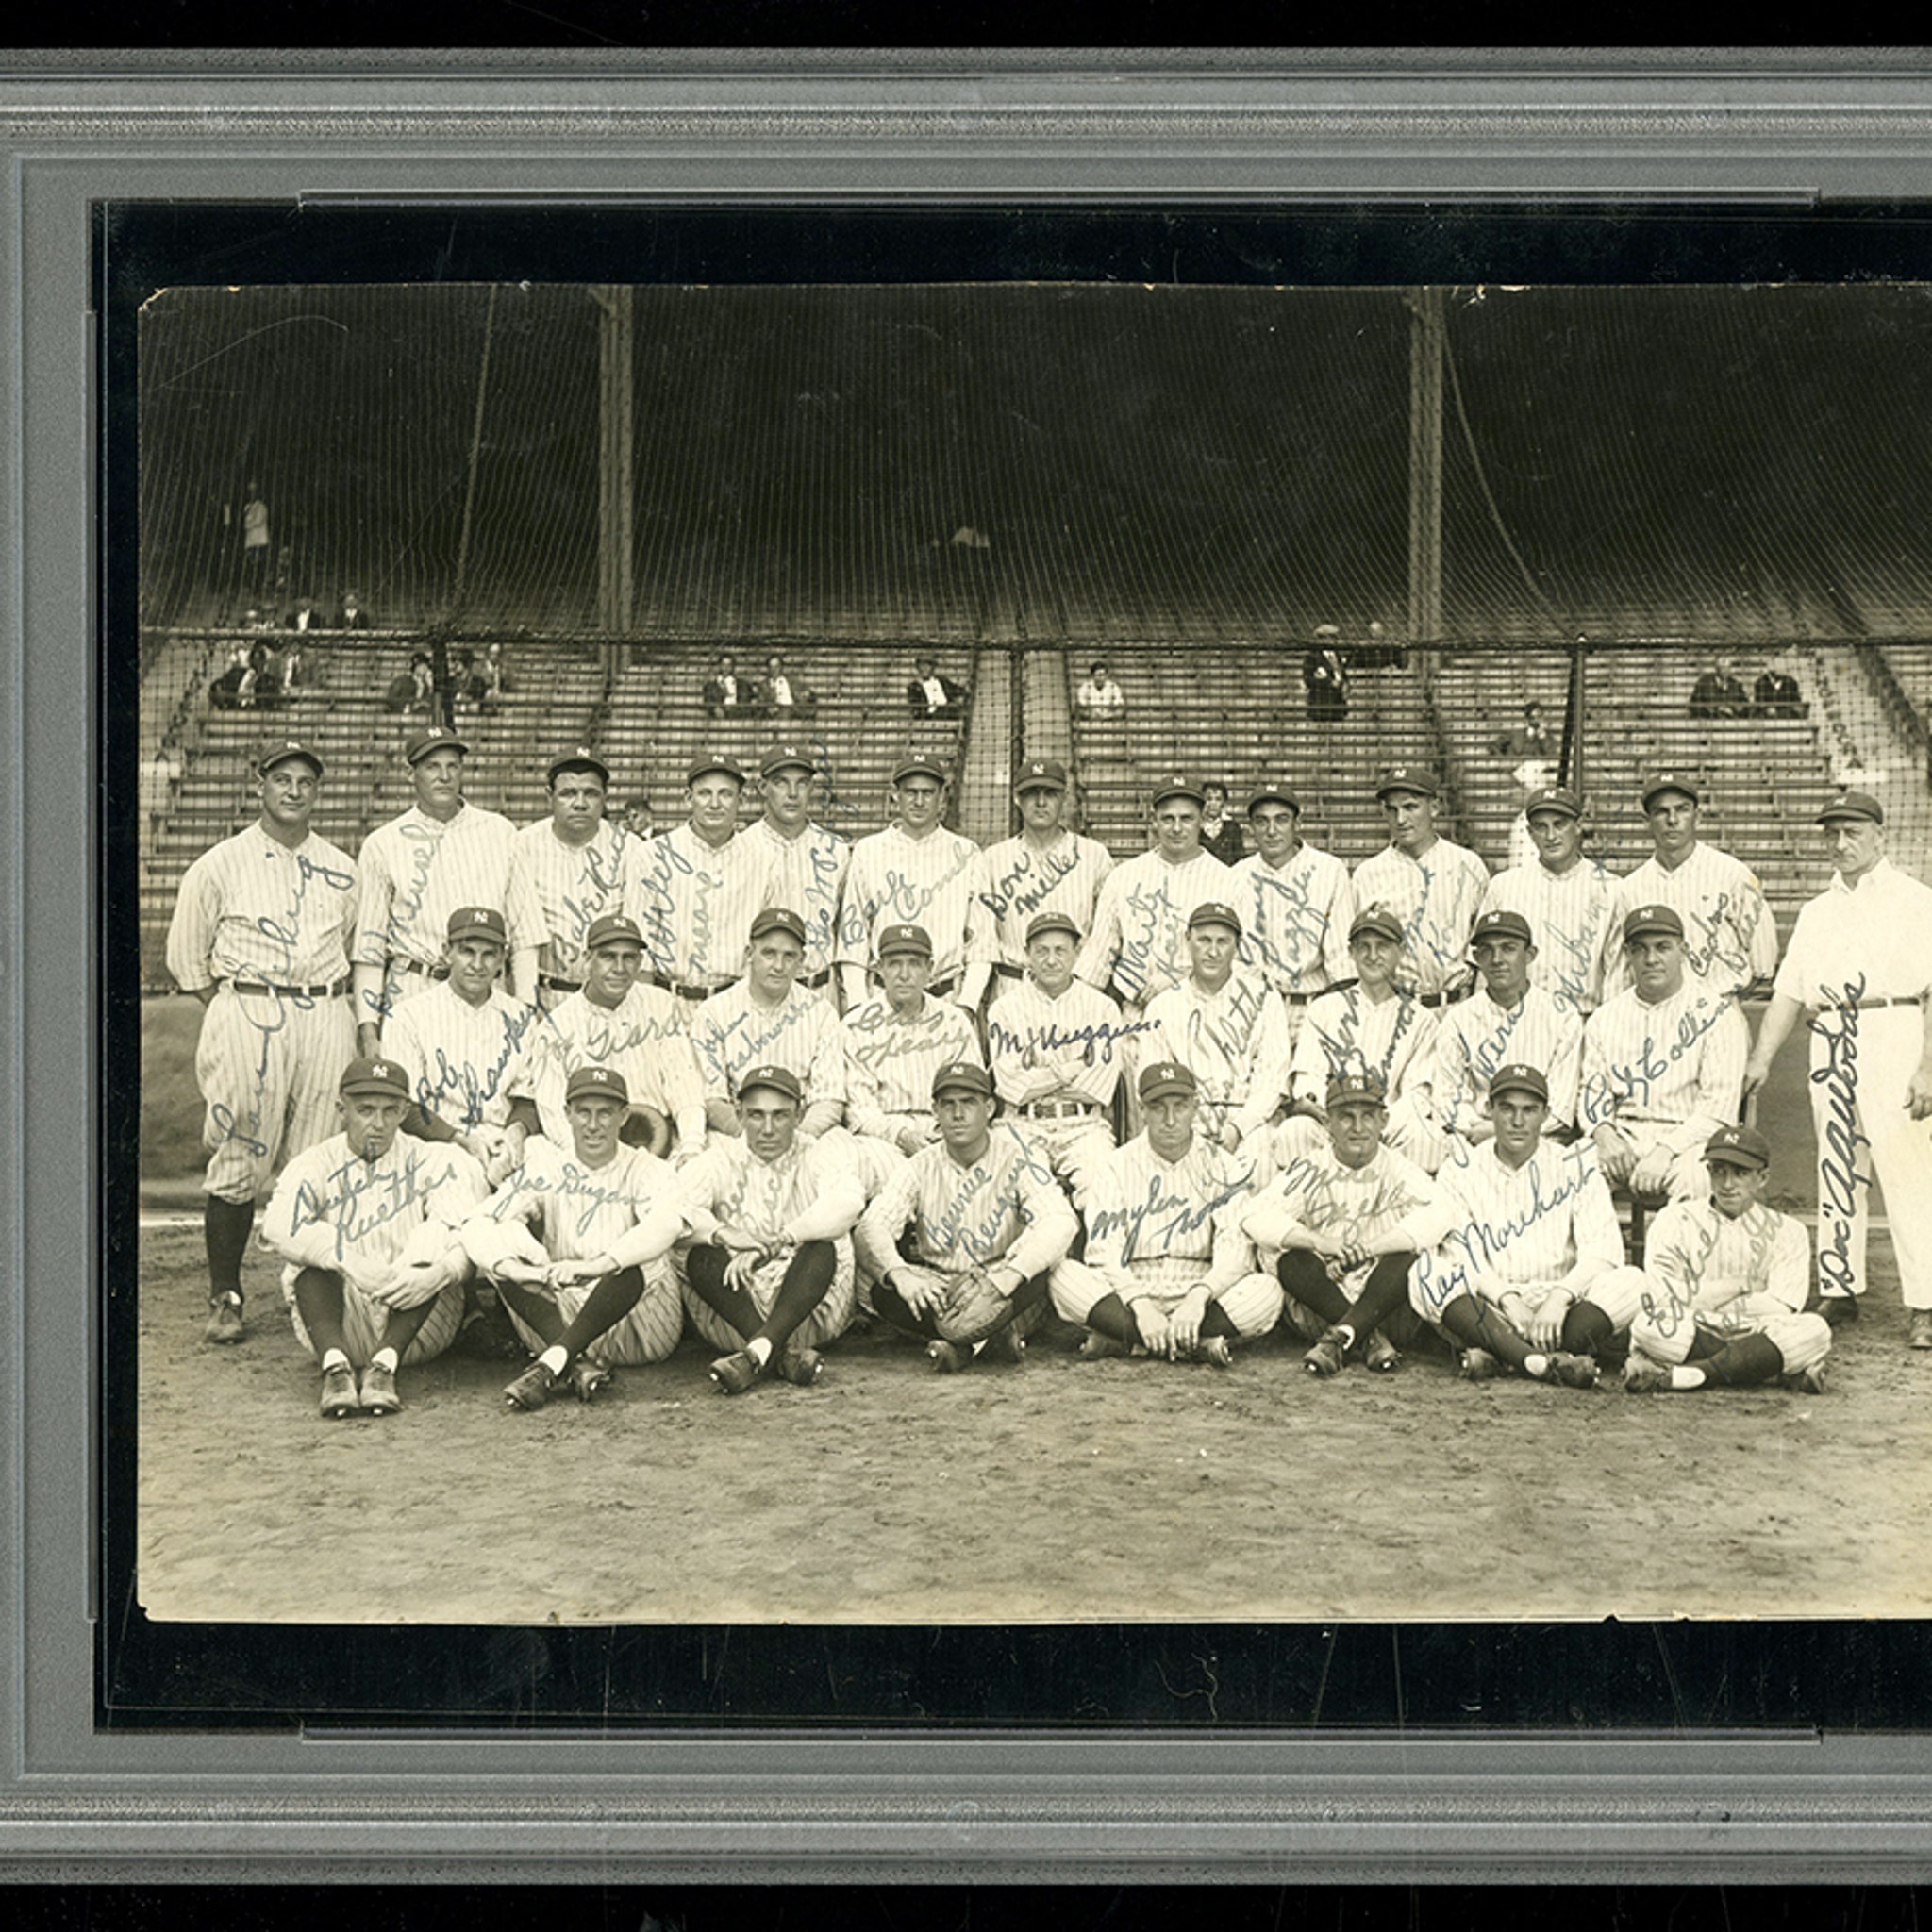 Lou Gehrig 1927 New York Yankees Team PHOTO World Series Champs Babe Ruth 60HRs 